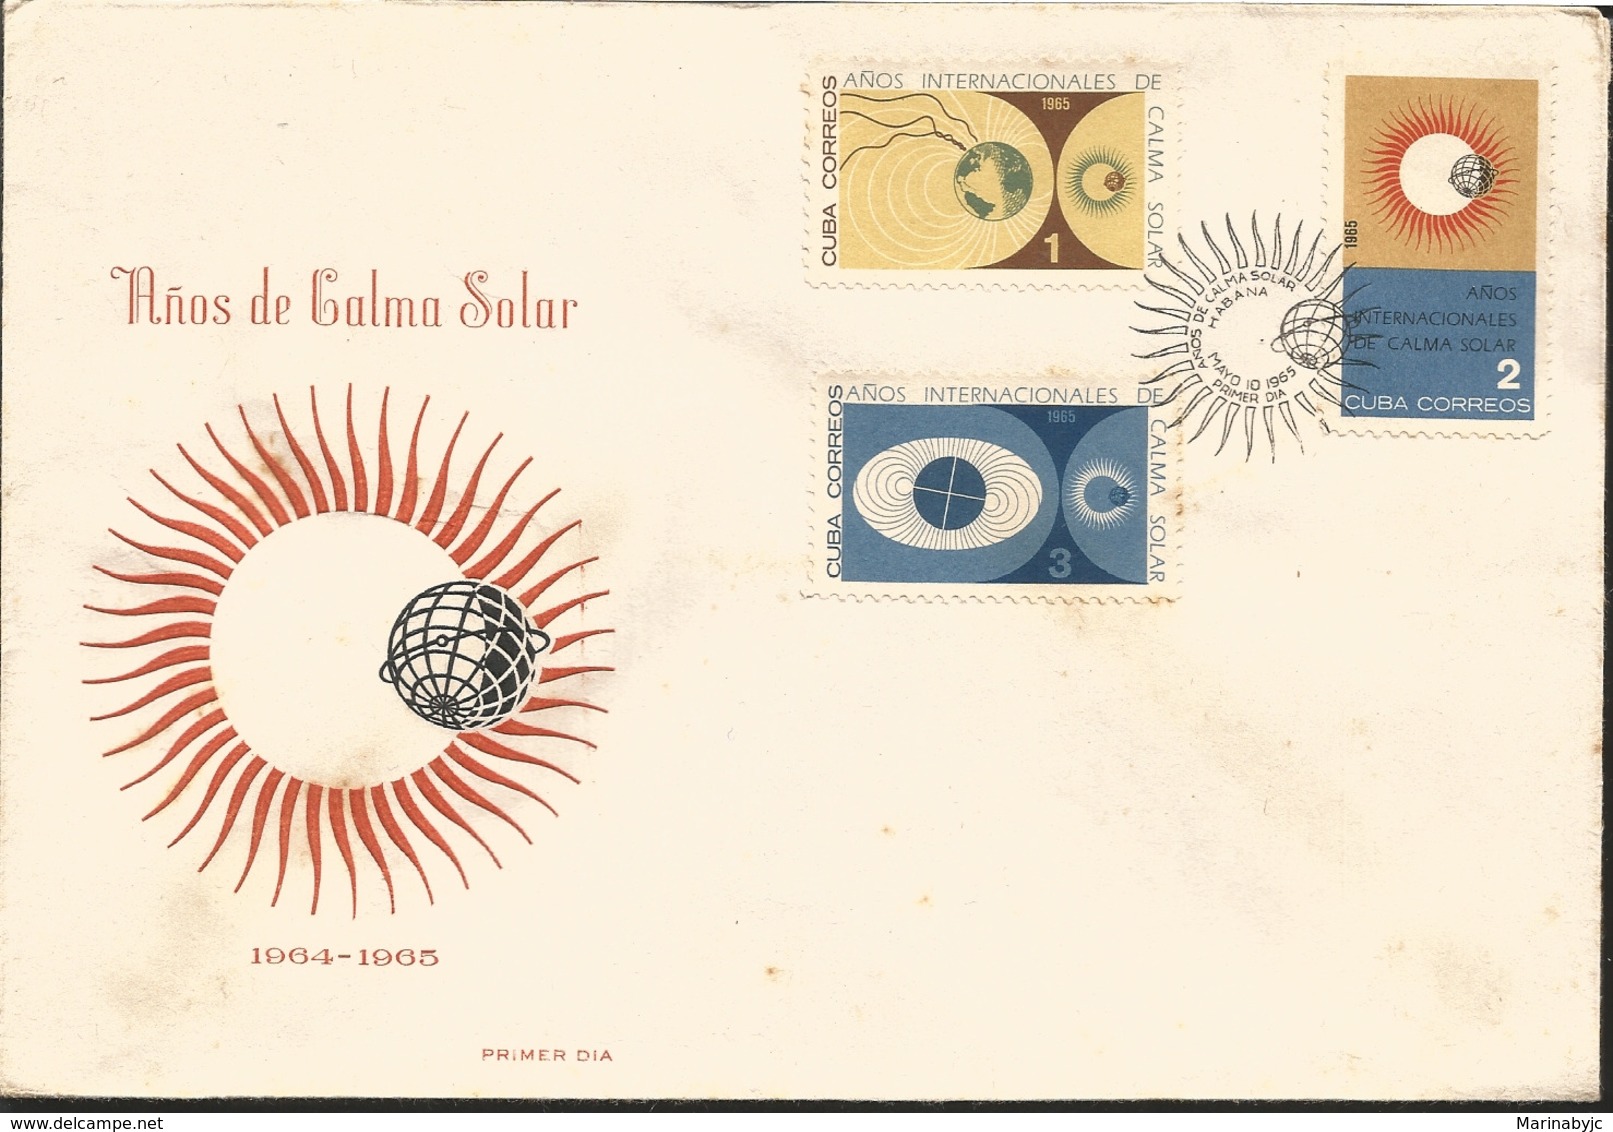 V) 1965 CARIBBEAN, INTERNATIONAL QUIET SUN YEAR, MAGNETIC POLE, SUN, EARTH’S, WITH SLOGAN CANCELATION IN BLACK, FDC - Storia Postale